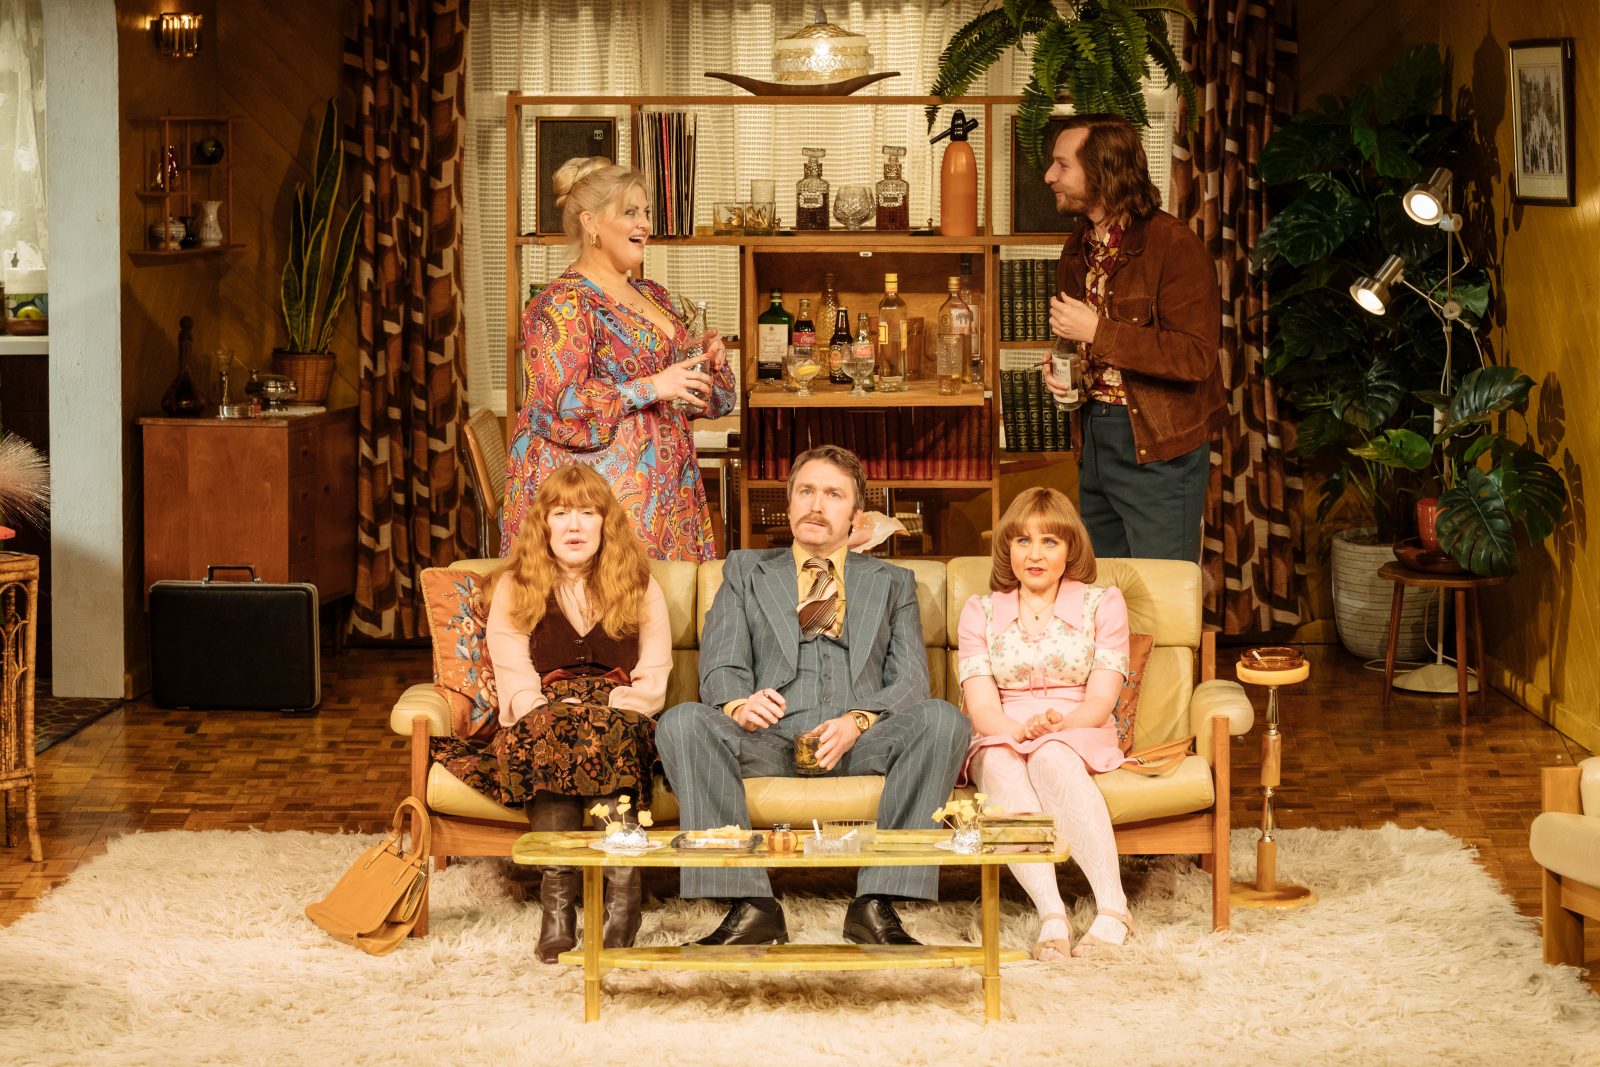 abigail's party press image featuring cast awkwardly sat on sofa and two people stood behind looking at each other suspiciously